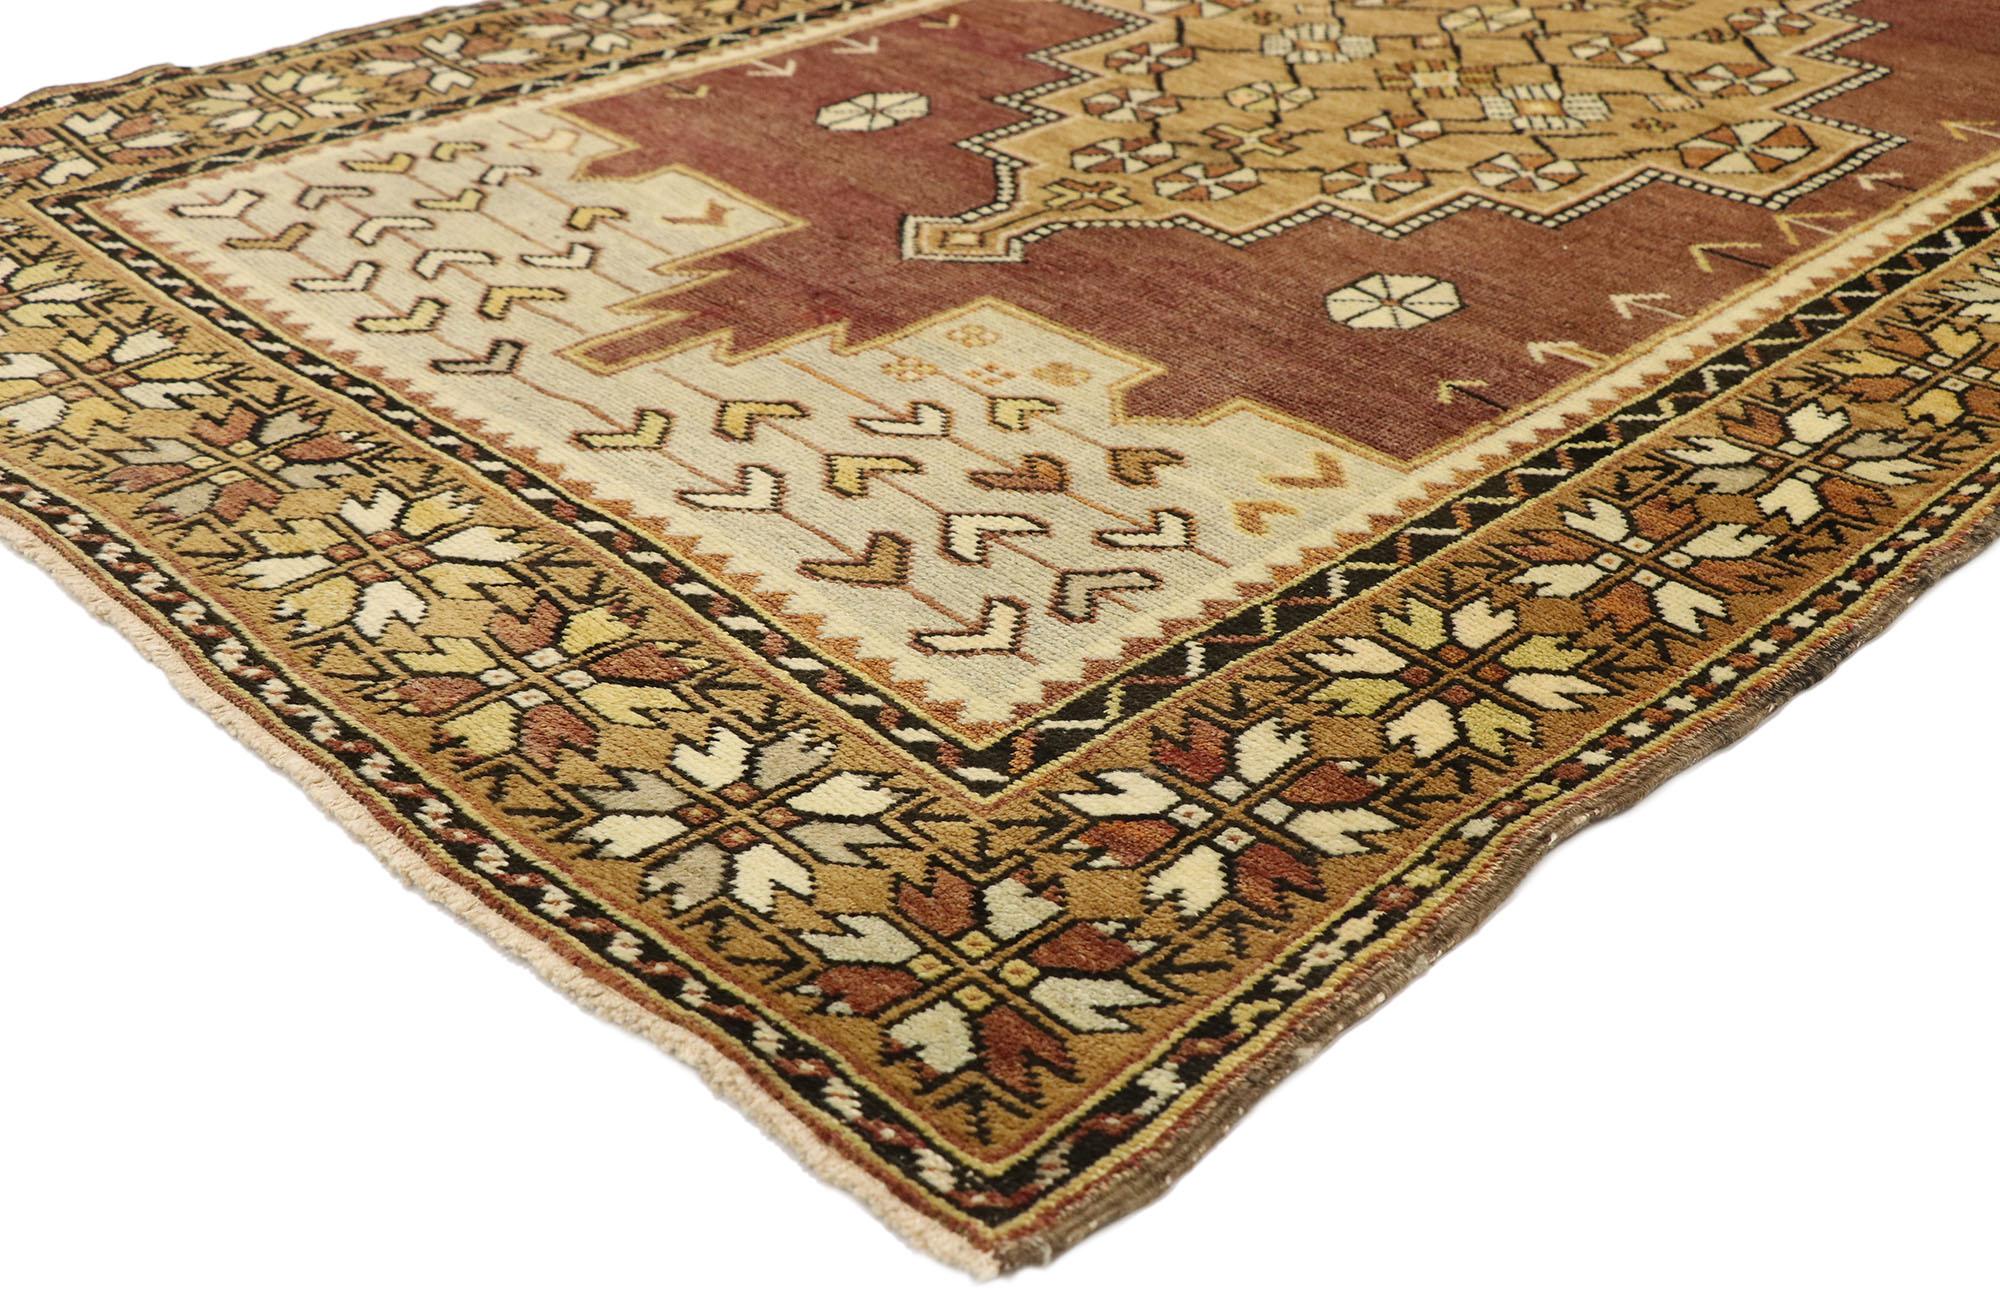 50176 vintage Turkish Oushak rug with Rustic Modern Artisan style. Warm and inviting, this hand knotted wool vintage Turkish Oushak rug features a stepped central medallion patterned inside with a roundel rosette pinwheel lattice floating in an